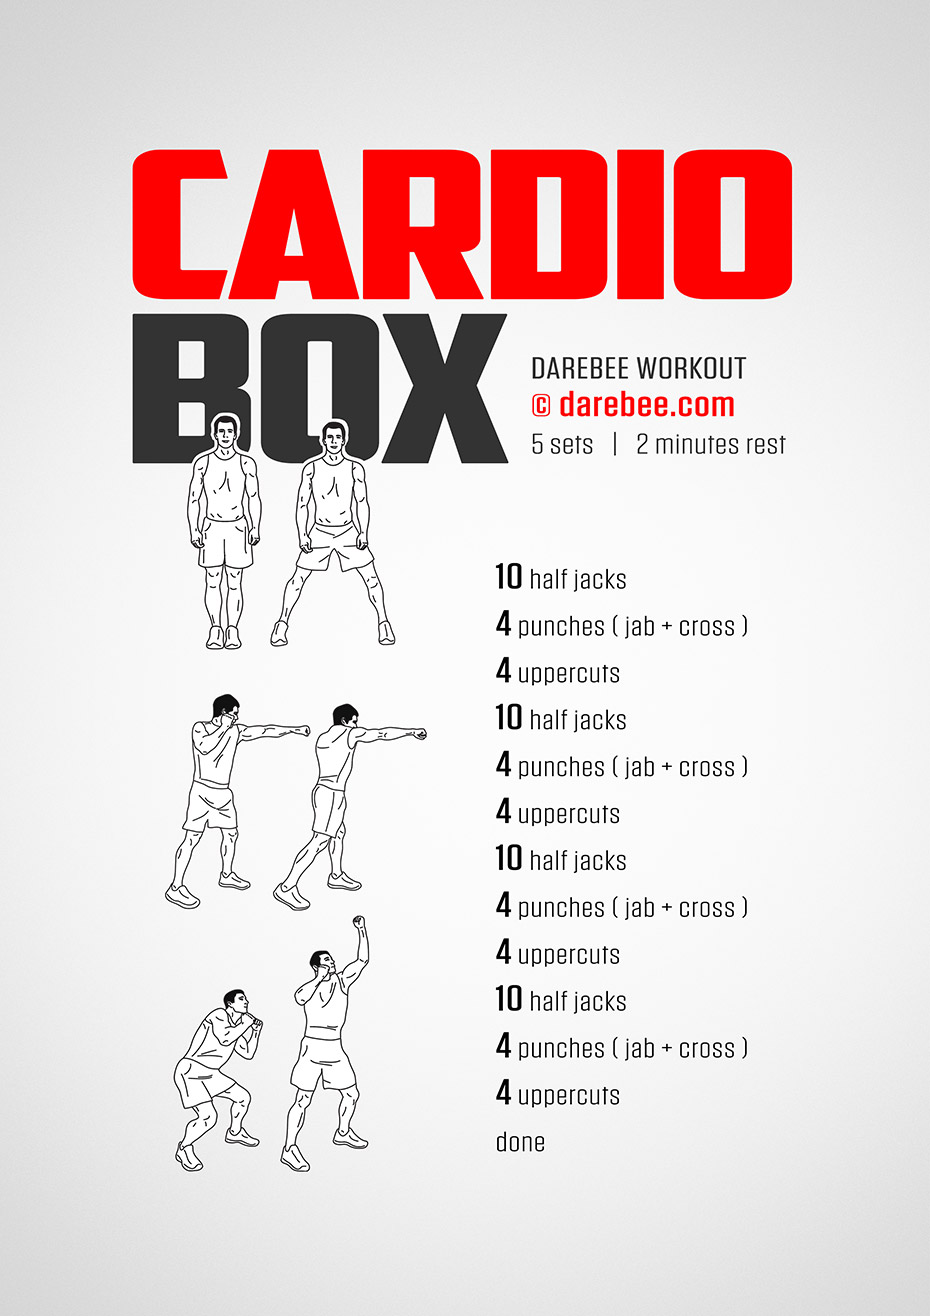 recommended daily cardio workout